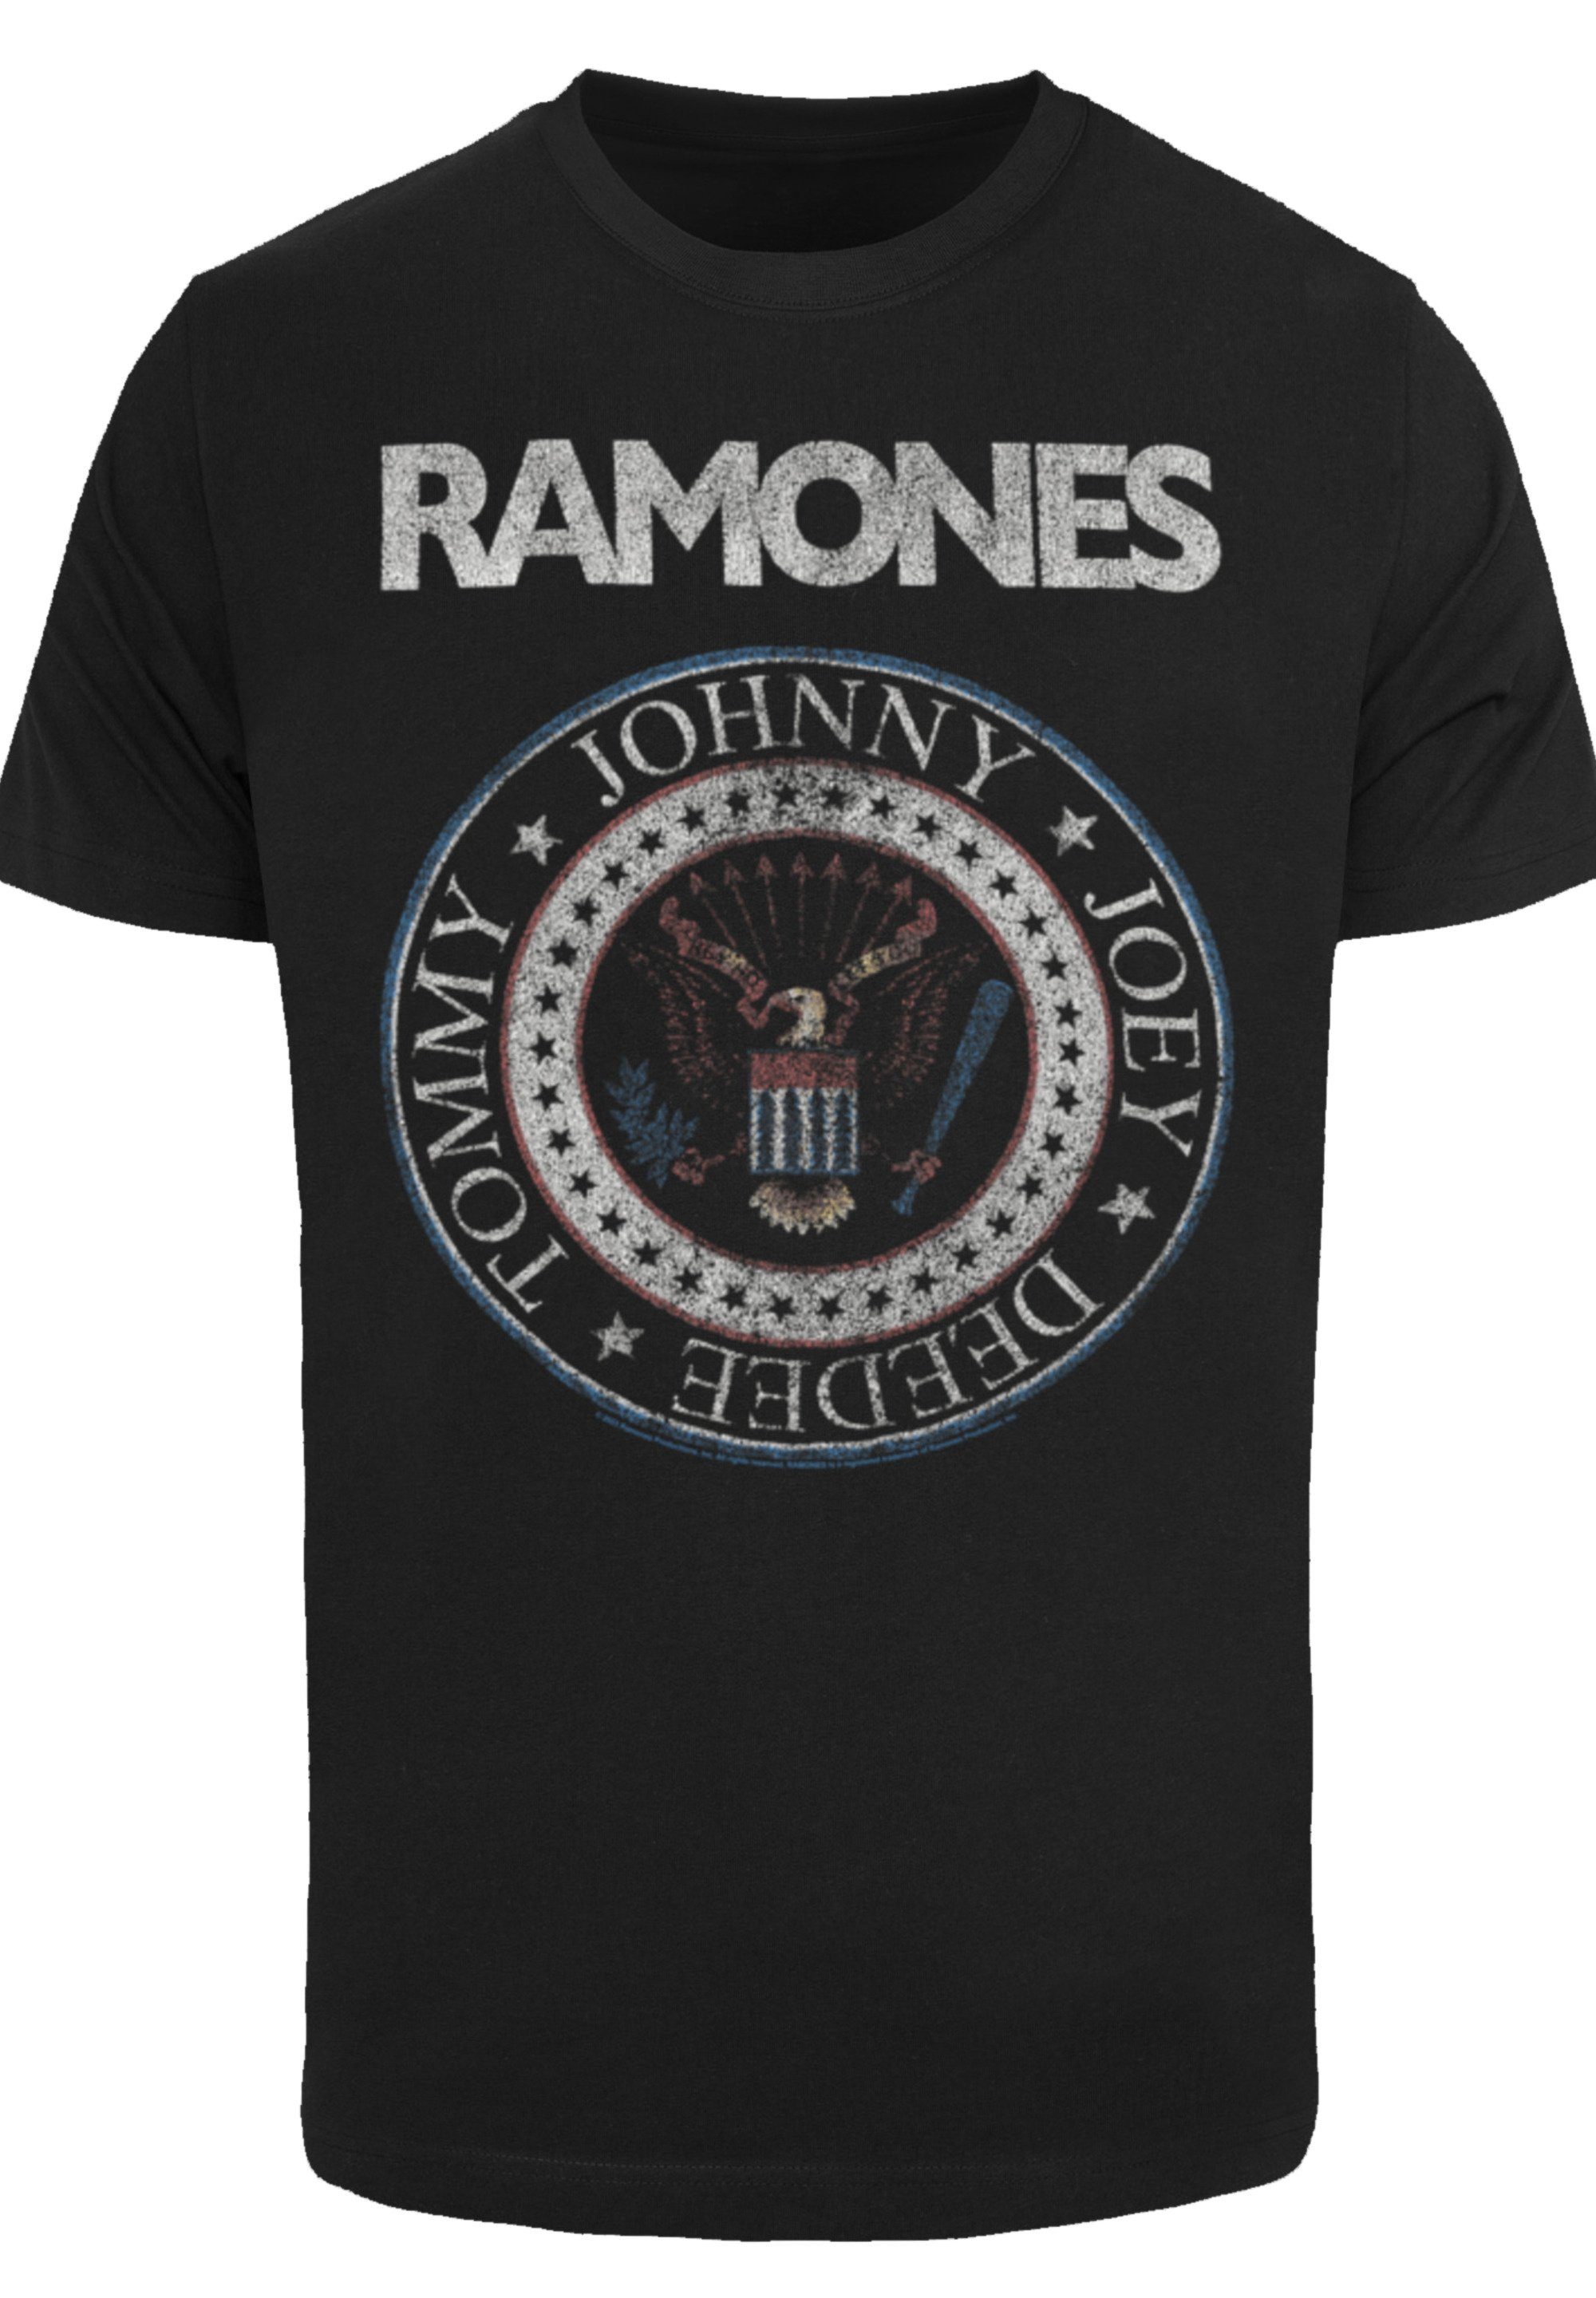 Rock T-Shirt Premium Rock-Musik Band, Ramones Band Red And Musik Qualität, White F4NT4STIC Seal